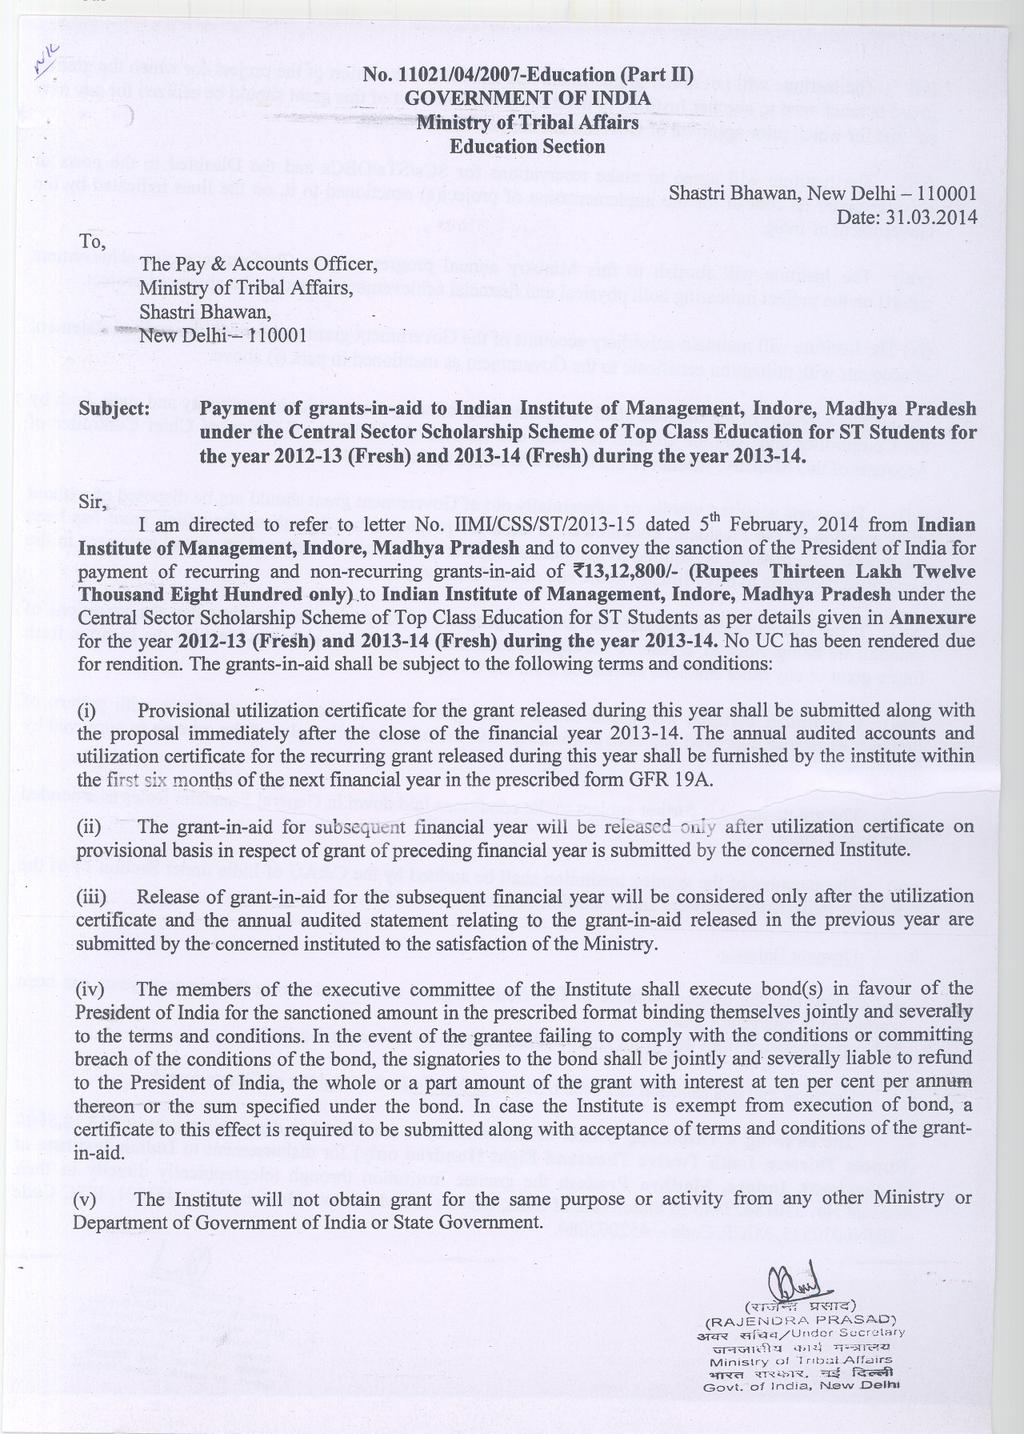 - No. 1l021104/2007-Education (Part II) GOVERNMENT OF INDIA Ministry of Tribal Affairs Education Section To, The Pay & Accounts Officer, Ministry of Tribal Affairs, Shastri Bhawan,.